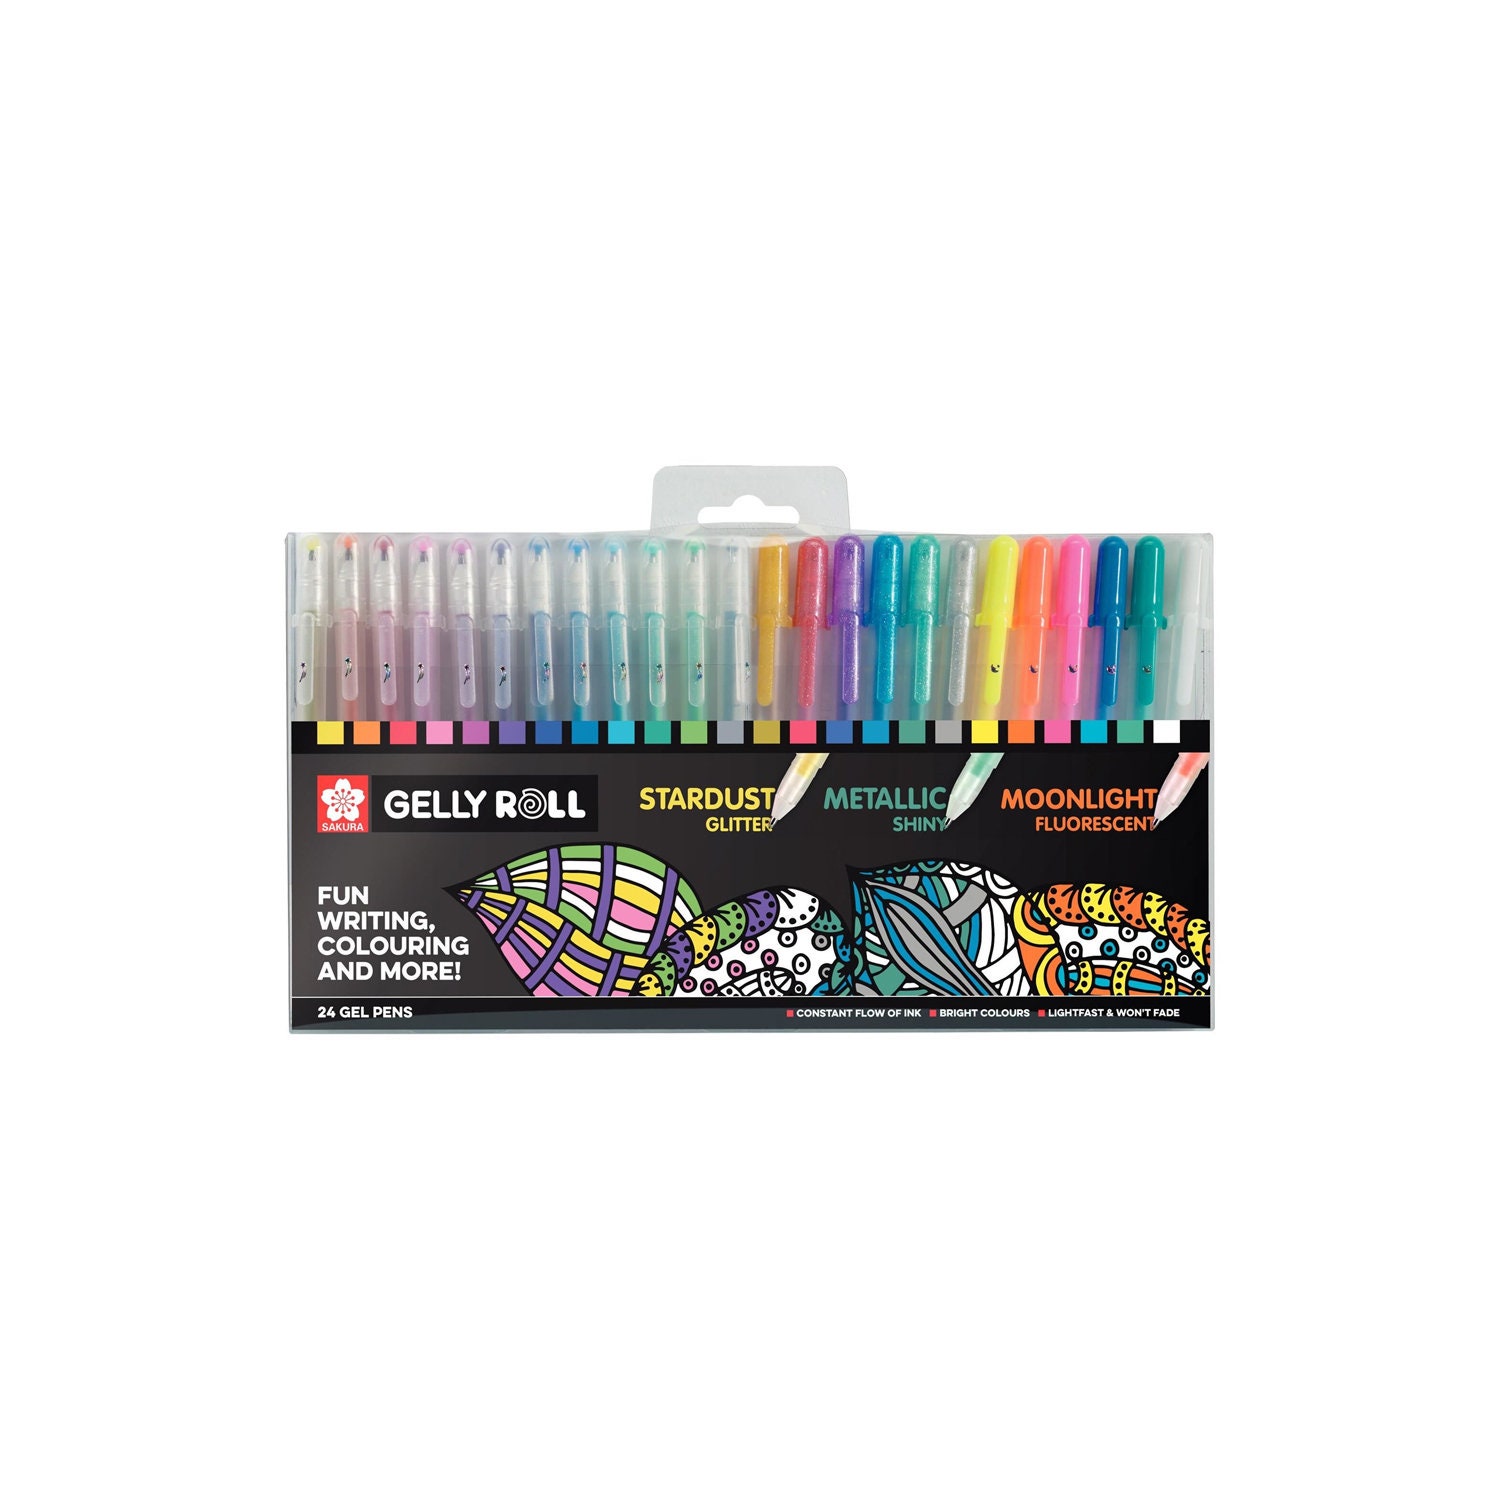 Bayam Colored Pens for Journaling Note Taking, 36 Vibrant Colors